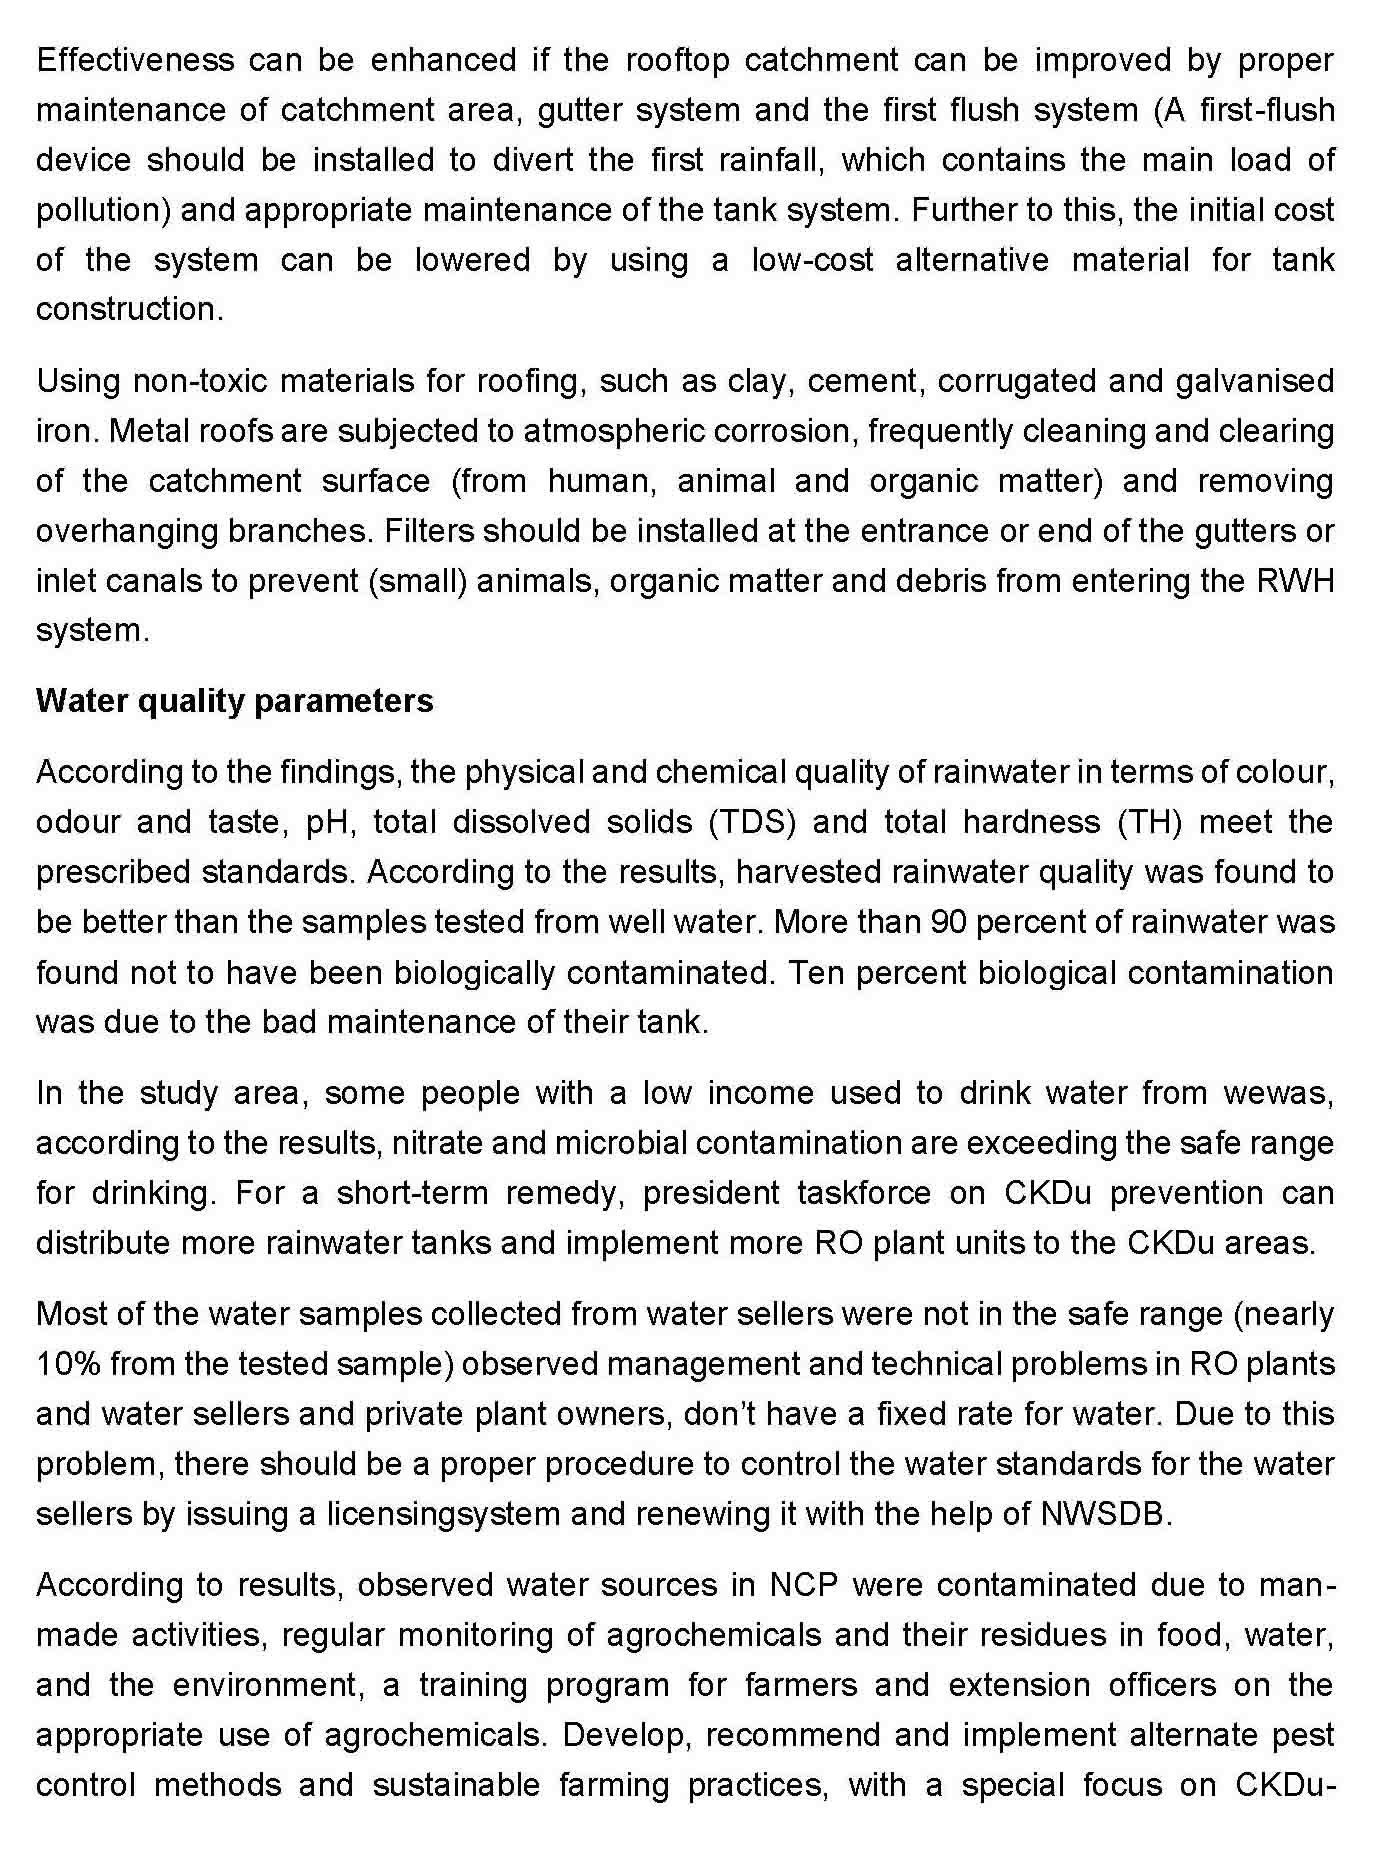 Drinking harvested rainwater safely Page 6